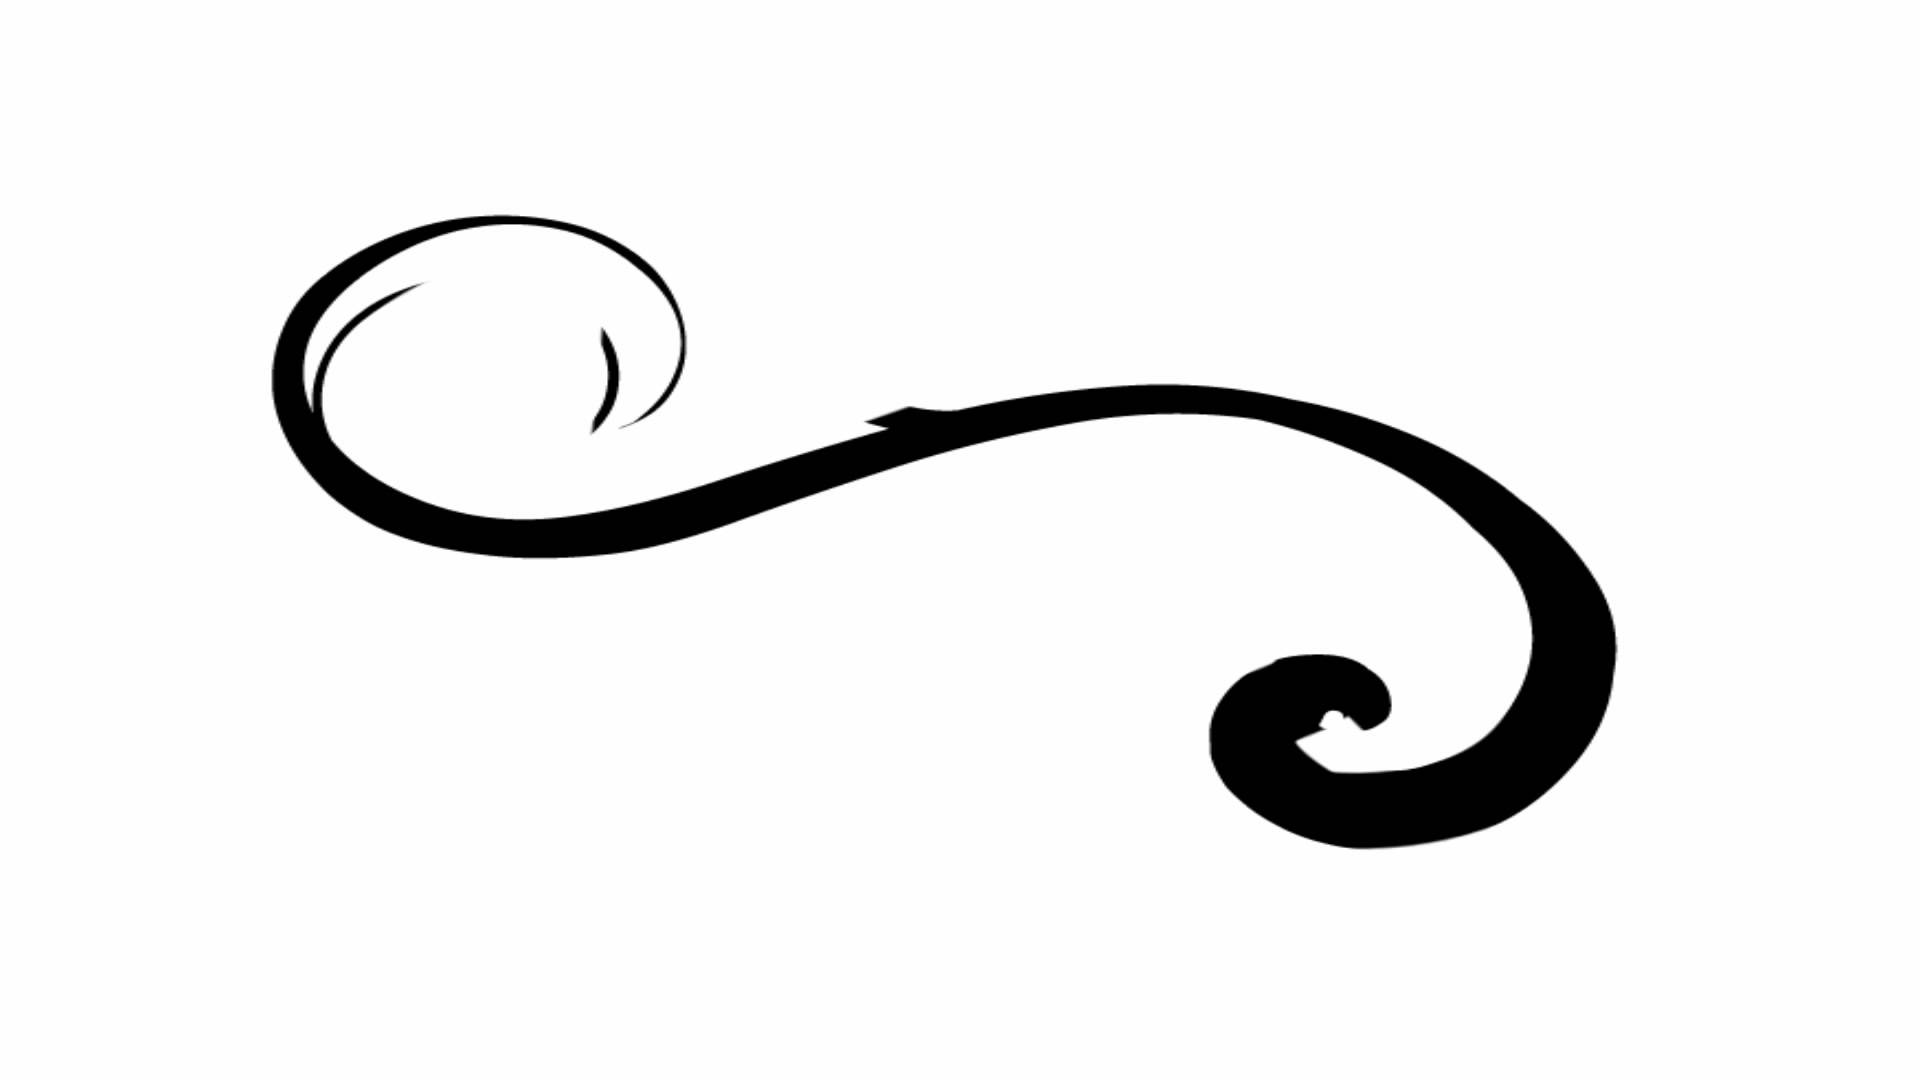 Clip Arts Related To : swirl line clipart. view all Simple Flourish Clipart...